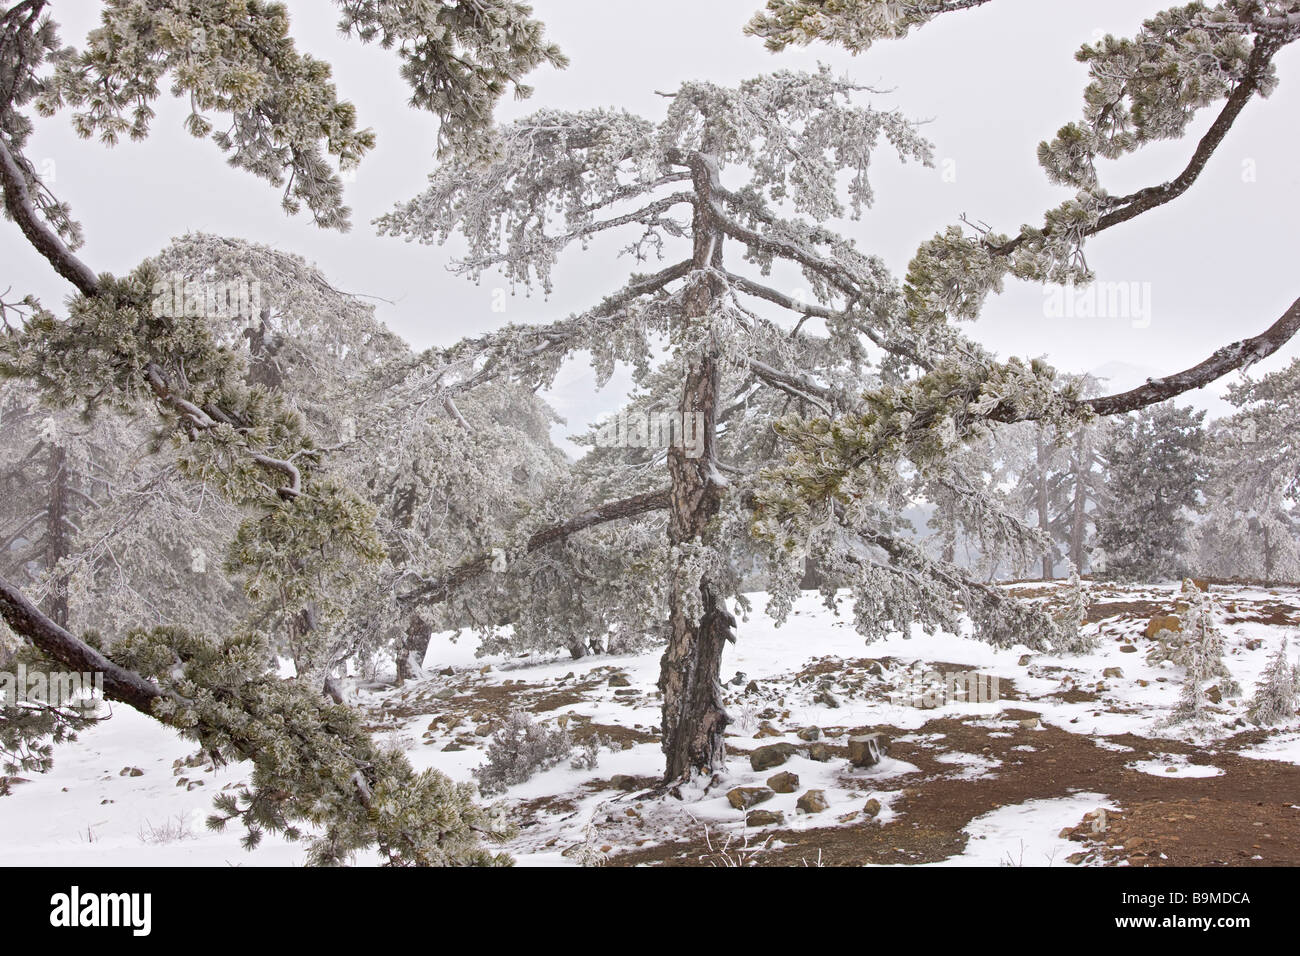 Ancient Black Pine forest Pinus nigra ssp pallasiana in snow and freezing fog high in the Troodos Mountains Greek Cyprus south Stock Photo